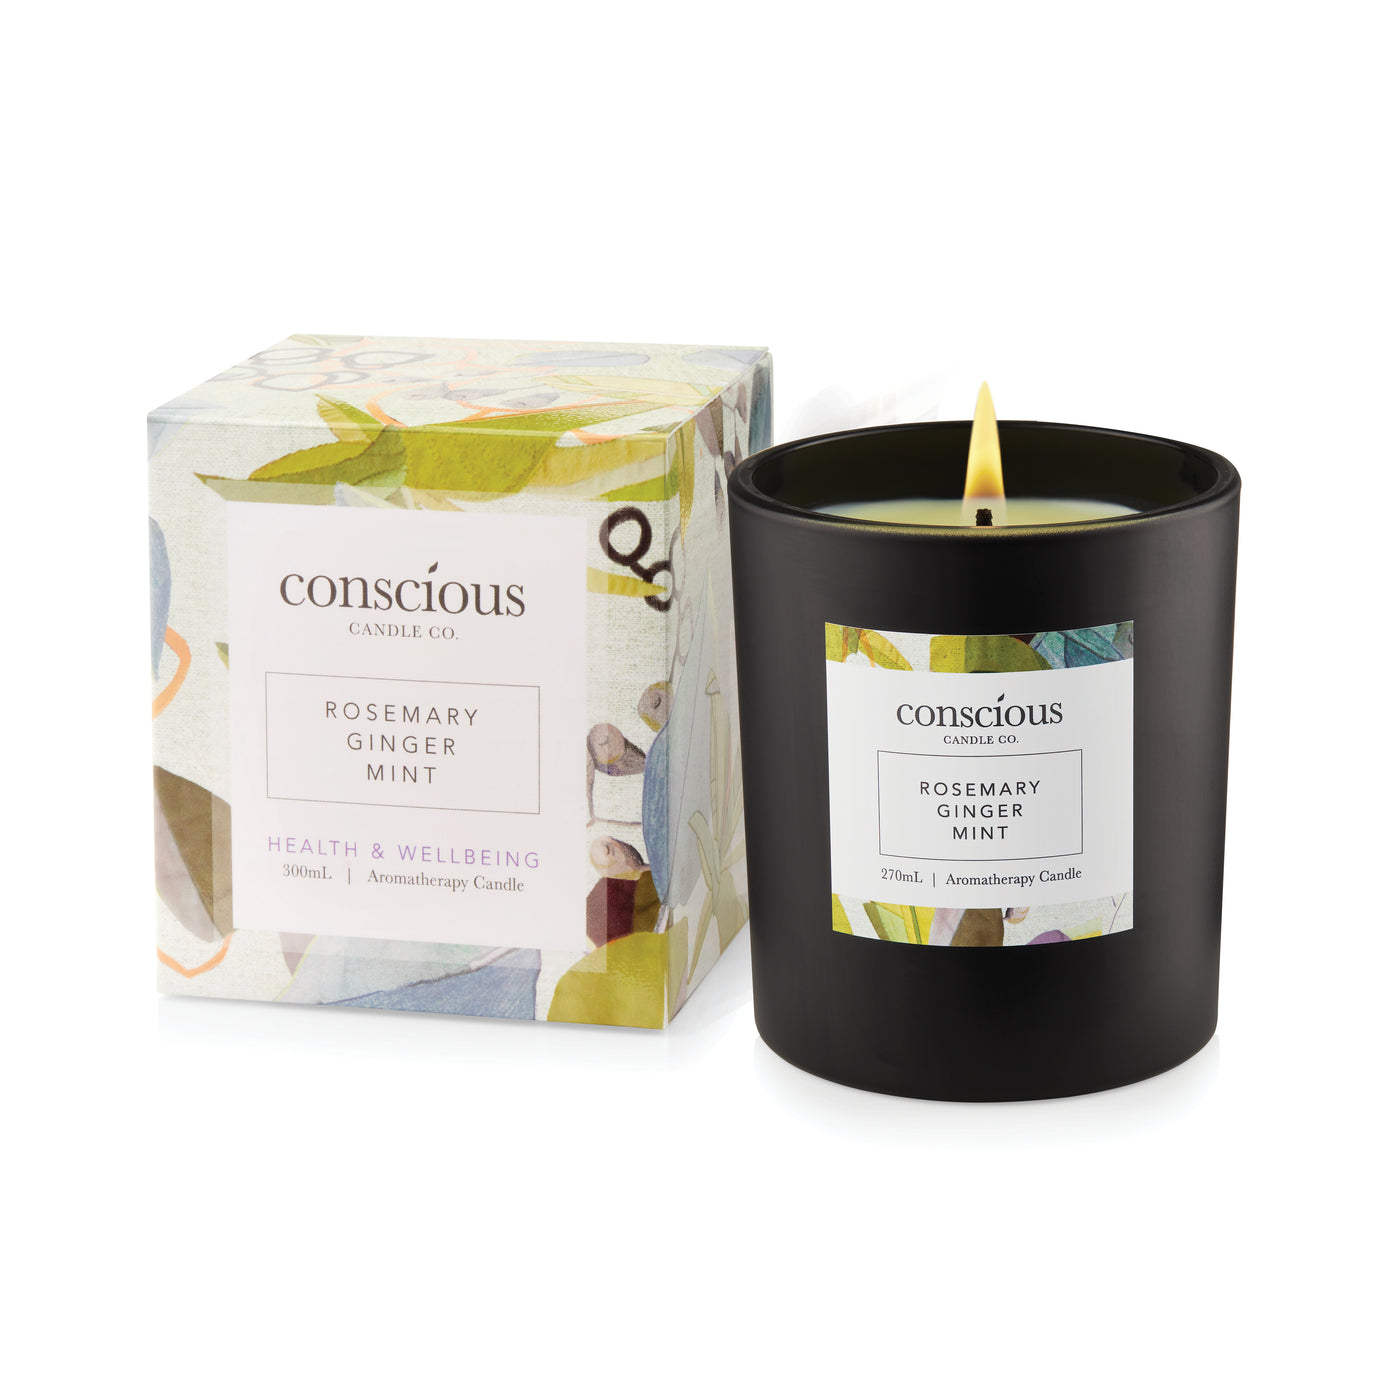 Rosemary, Ginger & Mint Aromatherapy Candle 300mL